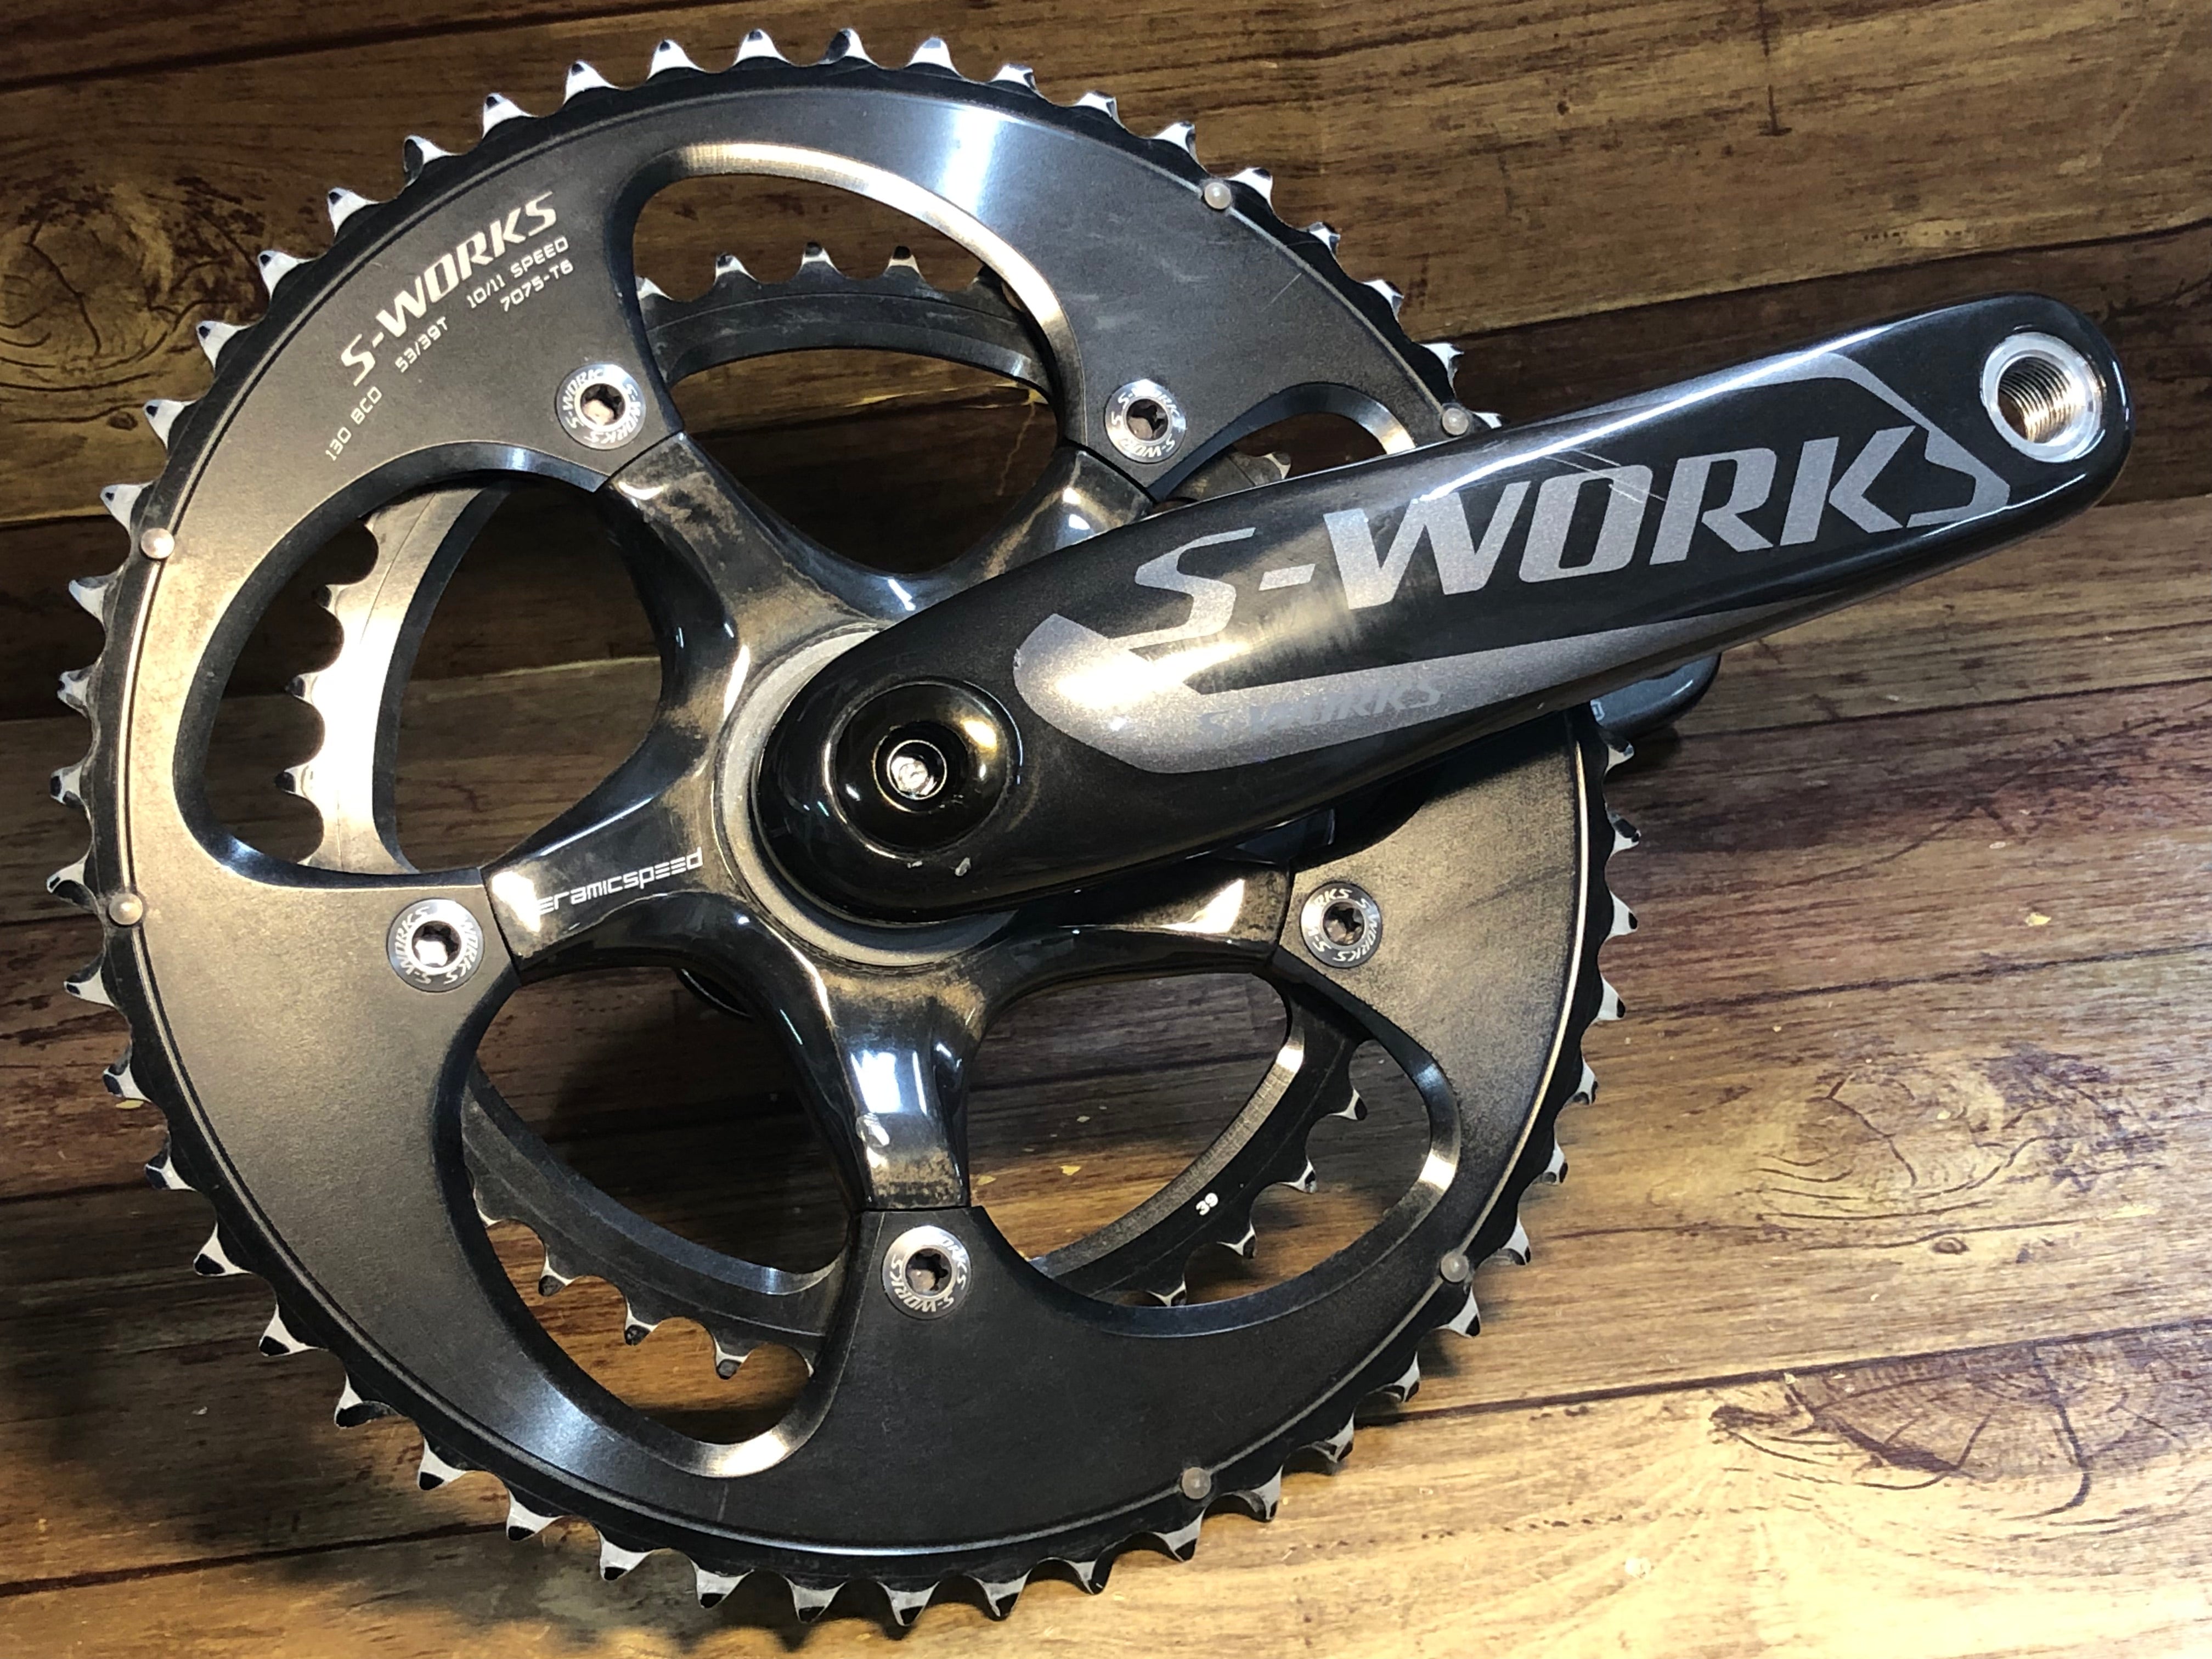 HE168 スペシャライズド S-WORKS CARBON FACT クランクセット BB30 53/39T 10-11S 172.5mm